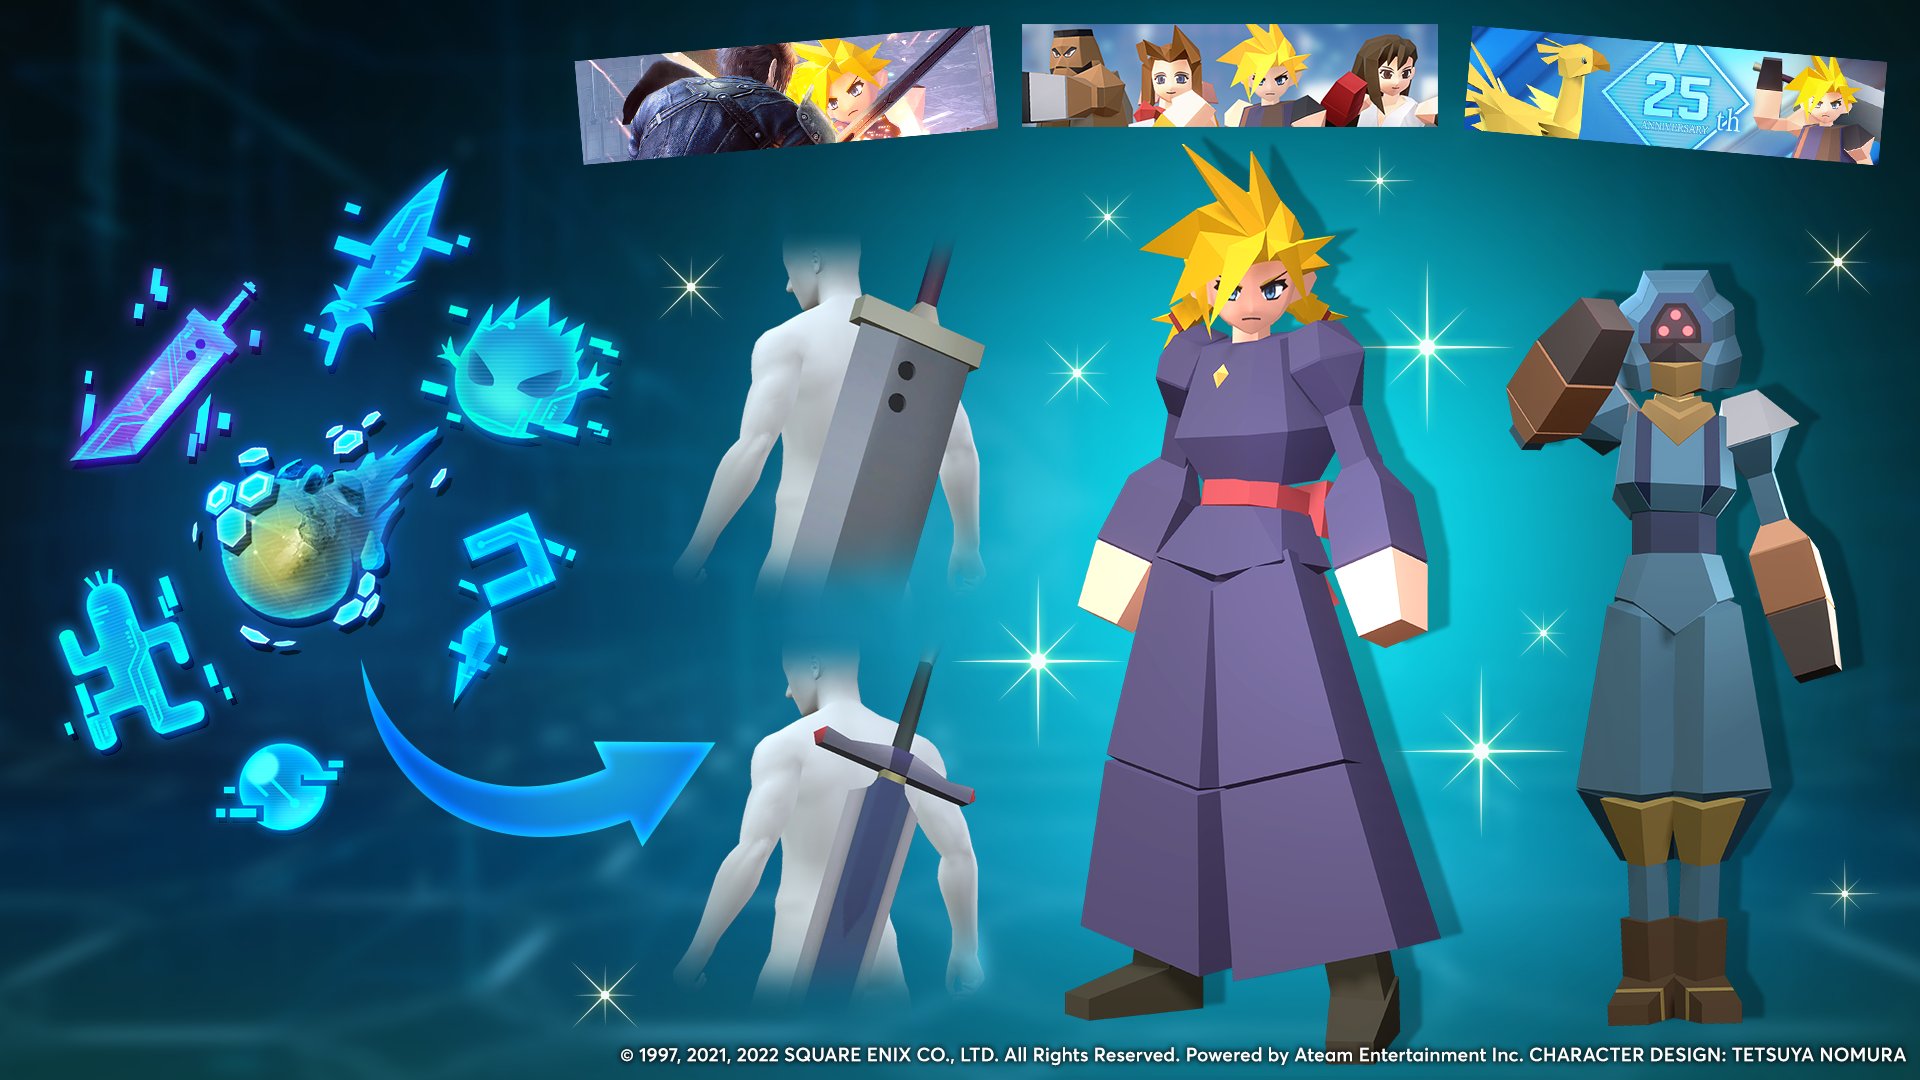 FFVII The First Soldier Gets Cloud in Dress (FF7) Skin